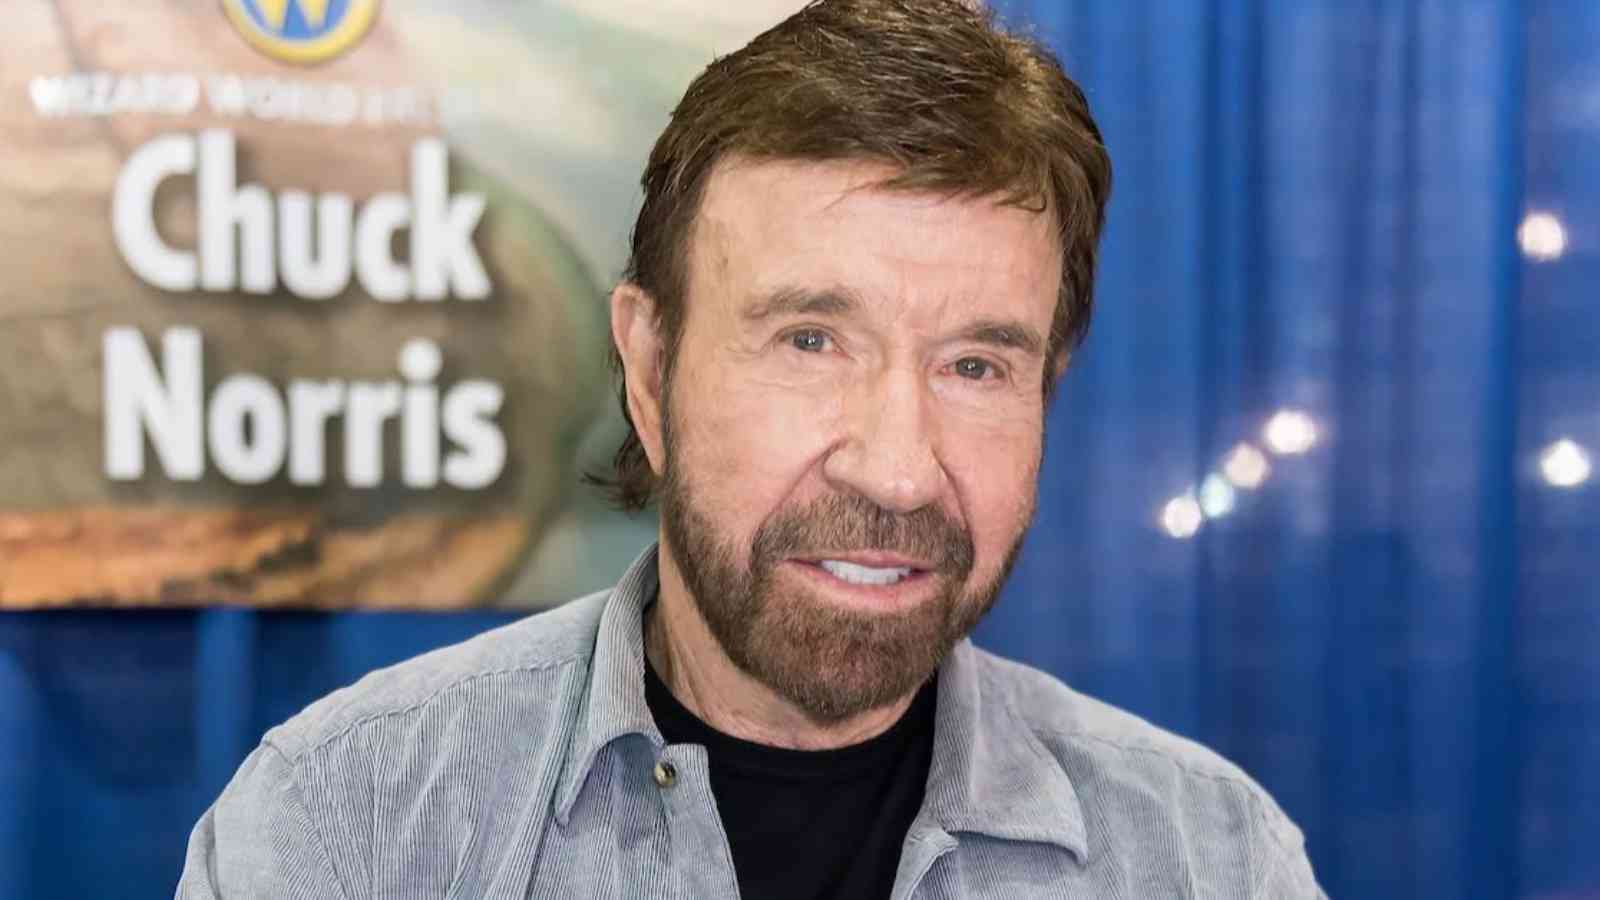 Chuck Norris Health Update: Medical Issues, Illness